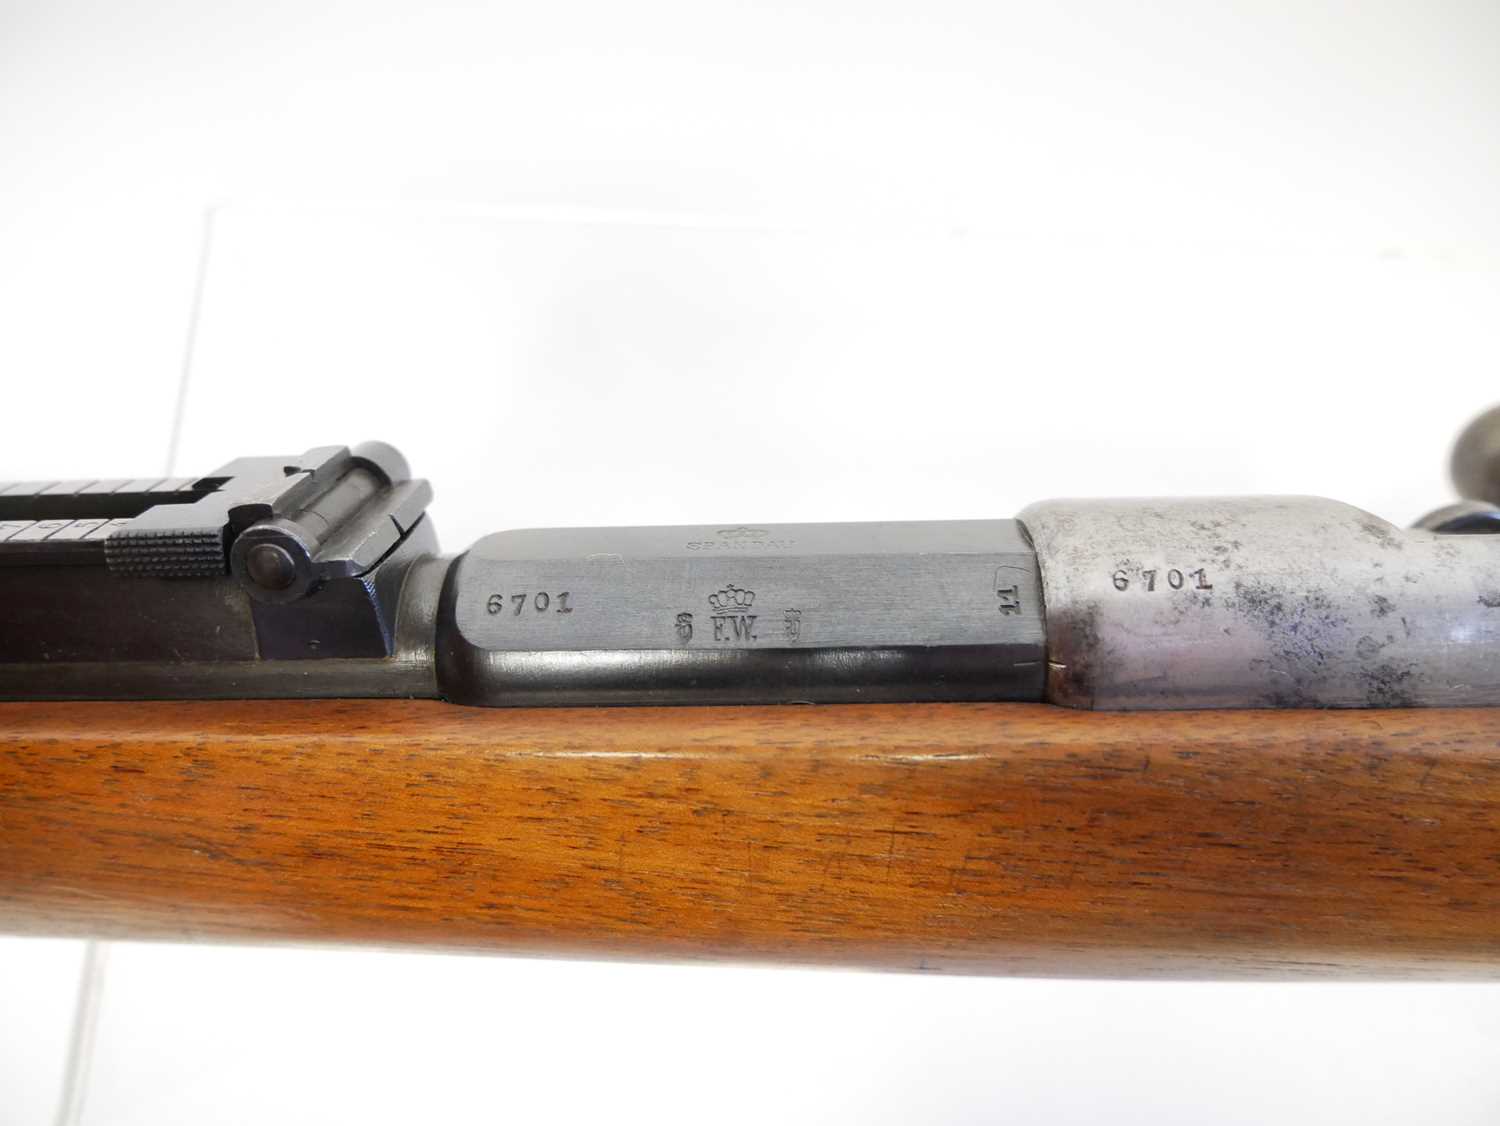 Mauser M1871/84 bolt action rifle 11 x 60R / .43 calibre, matching serial numbers 6701, 30.5" barrel - Image 18 of 20